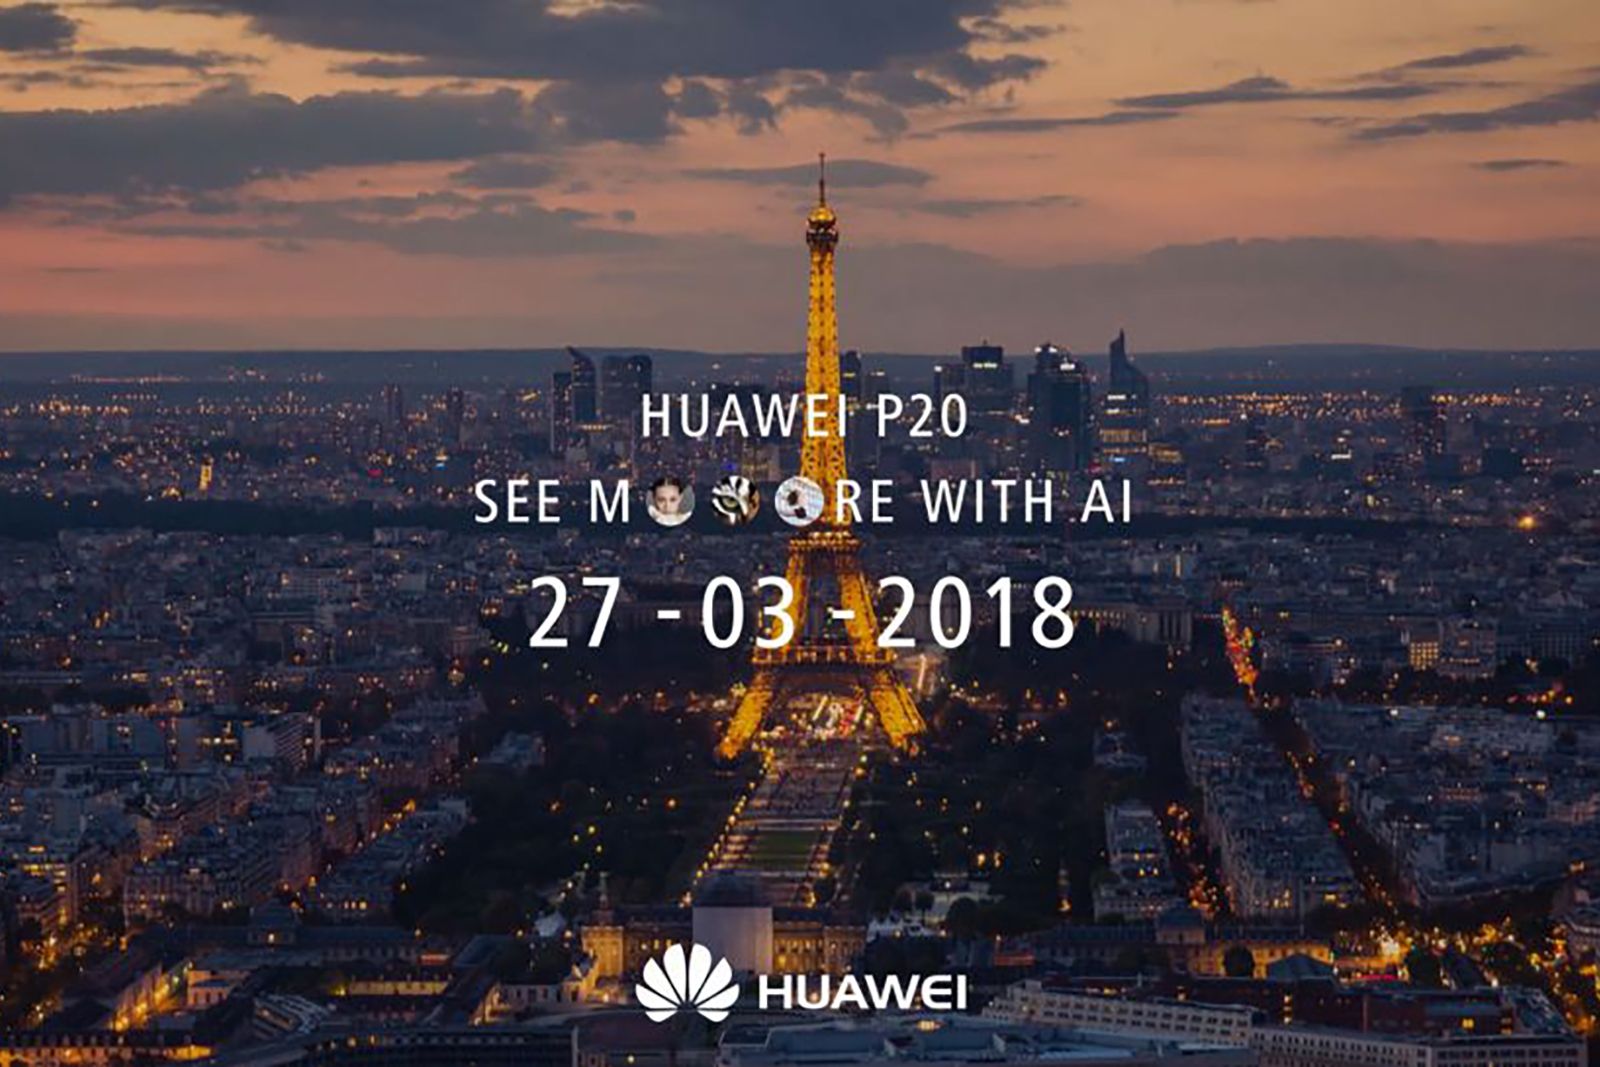 Huawei just confirmed its next flagship is called P20 in new teaser image 1